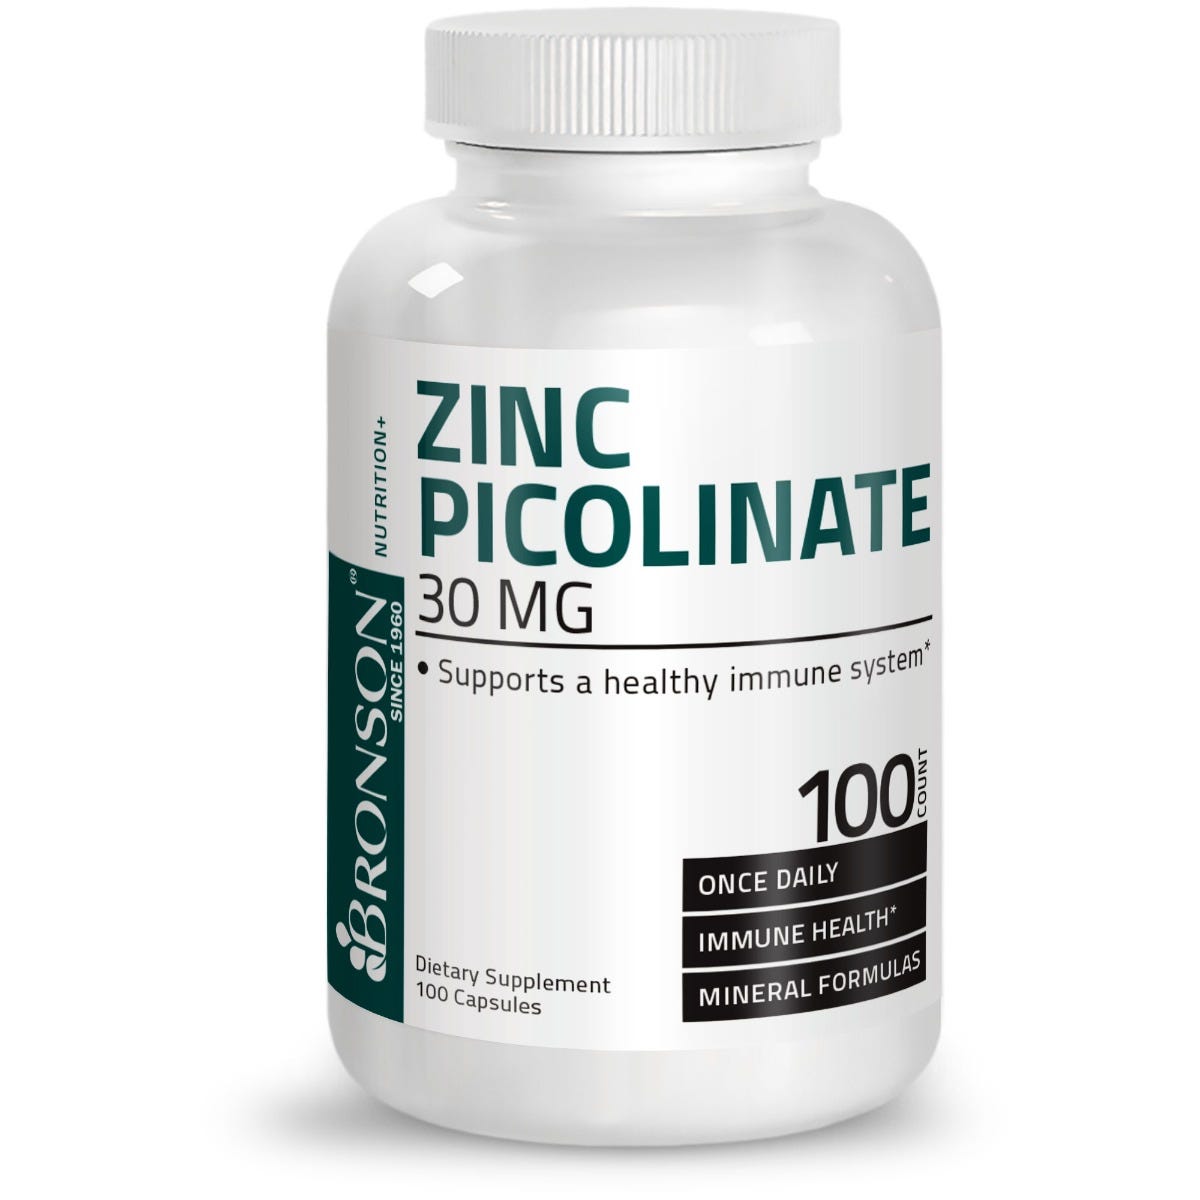 Zinc Picolinate - 30 mg - 100 Capsules view 1 of 6